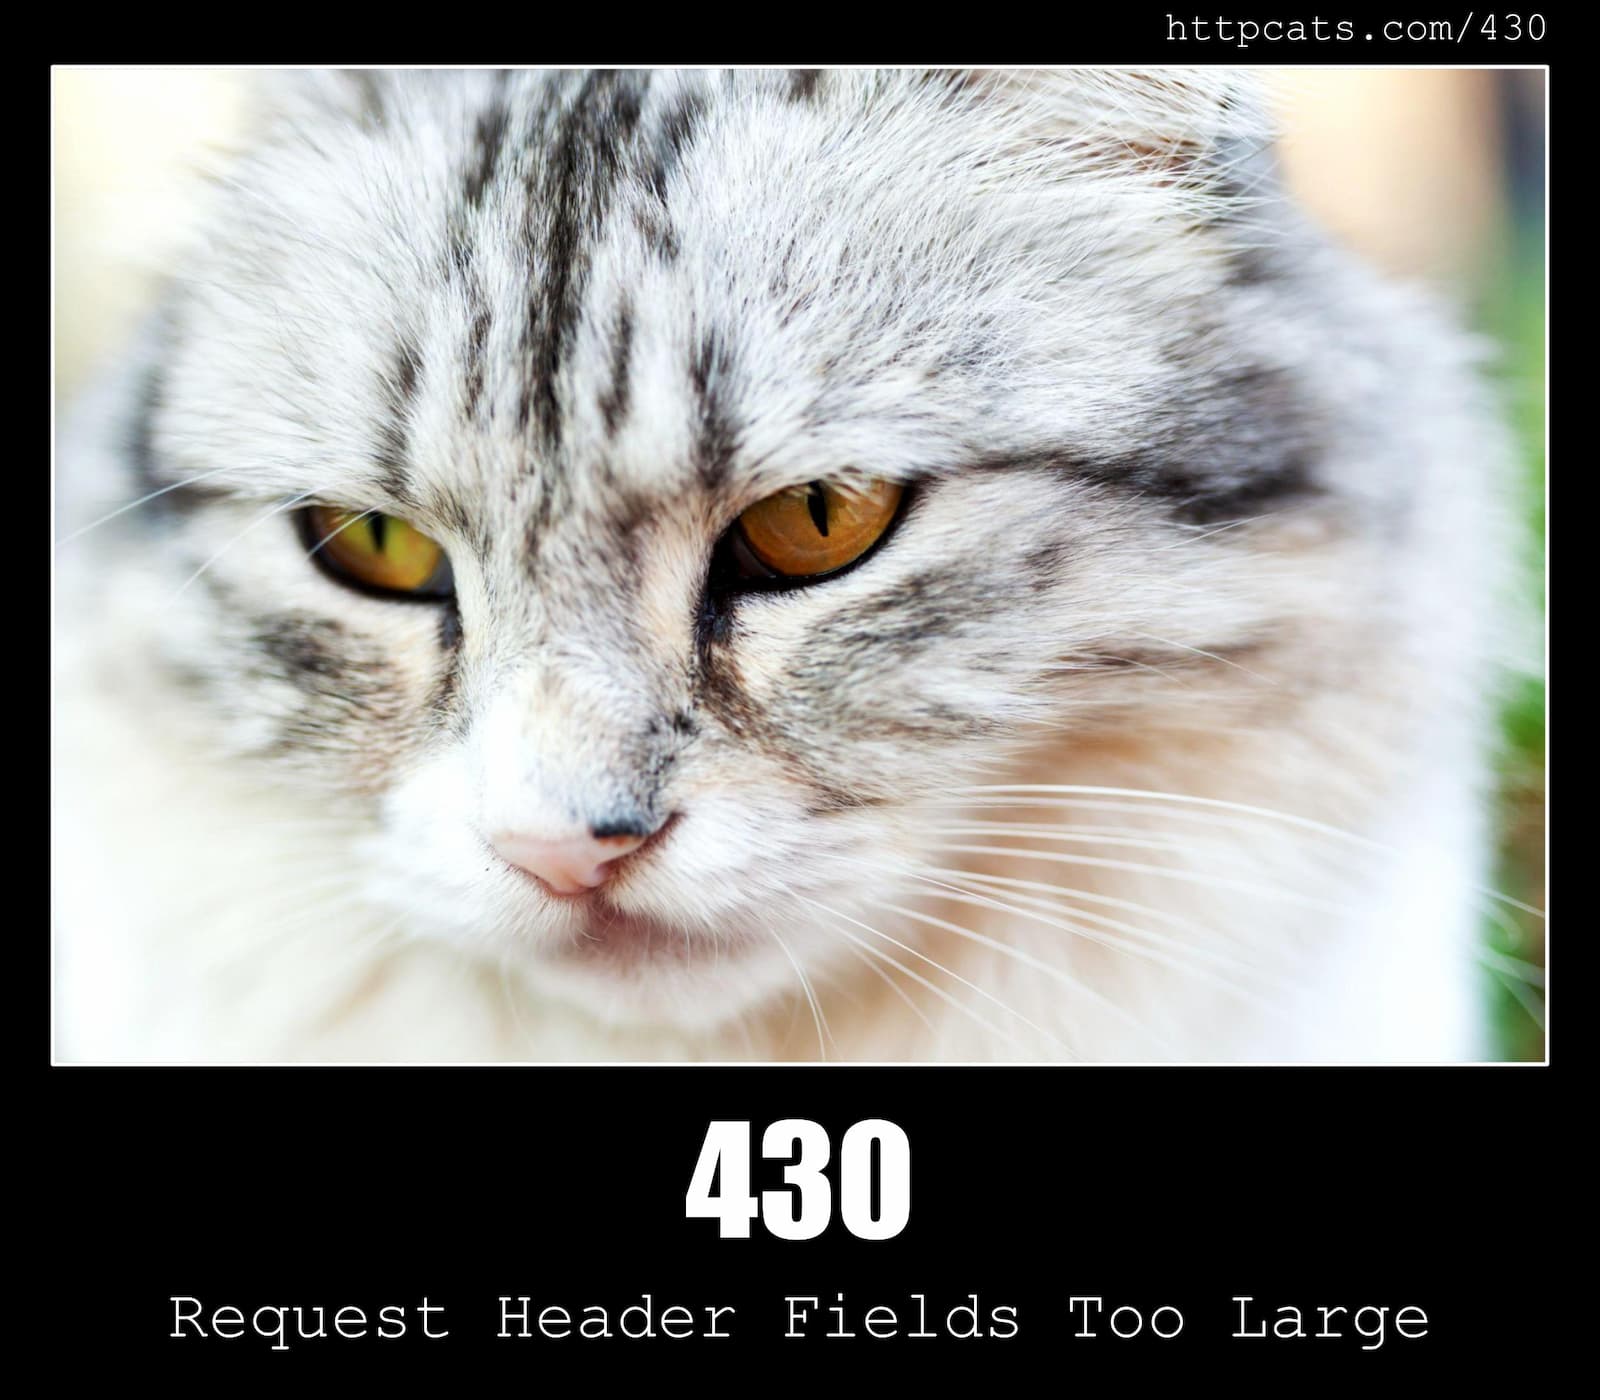 HTTP Status Code 430 Request Header Fields Too Large & Cats